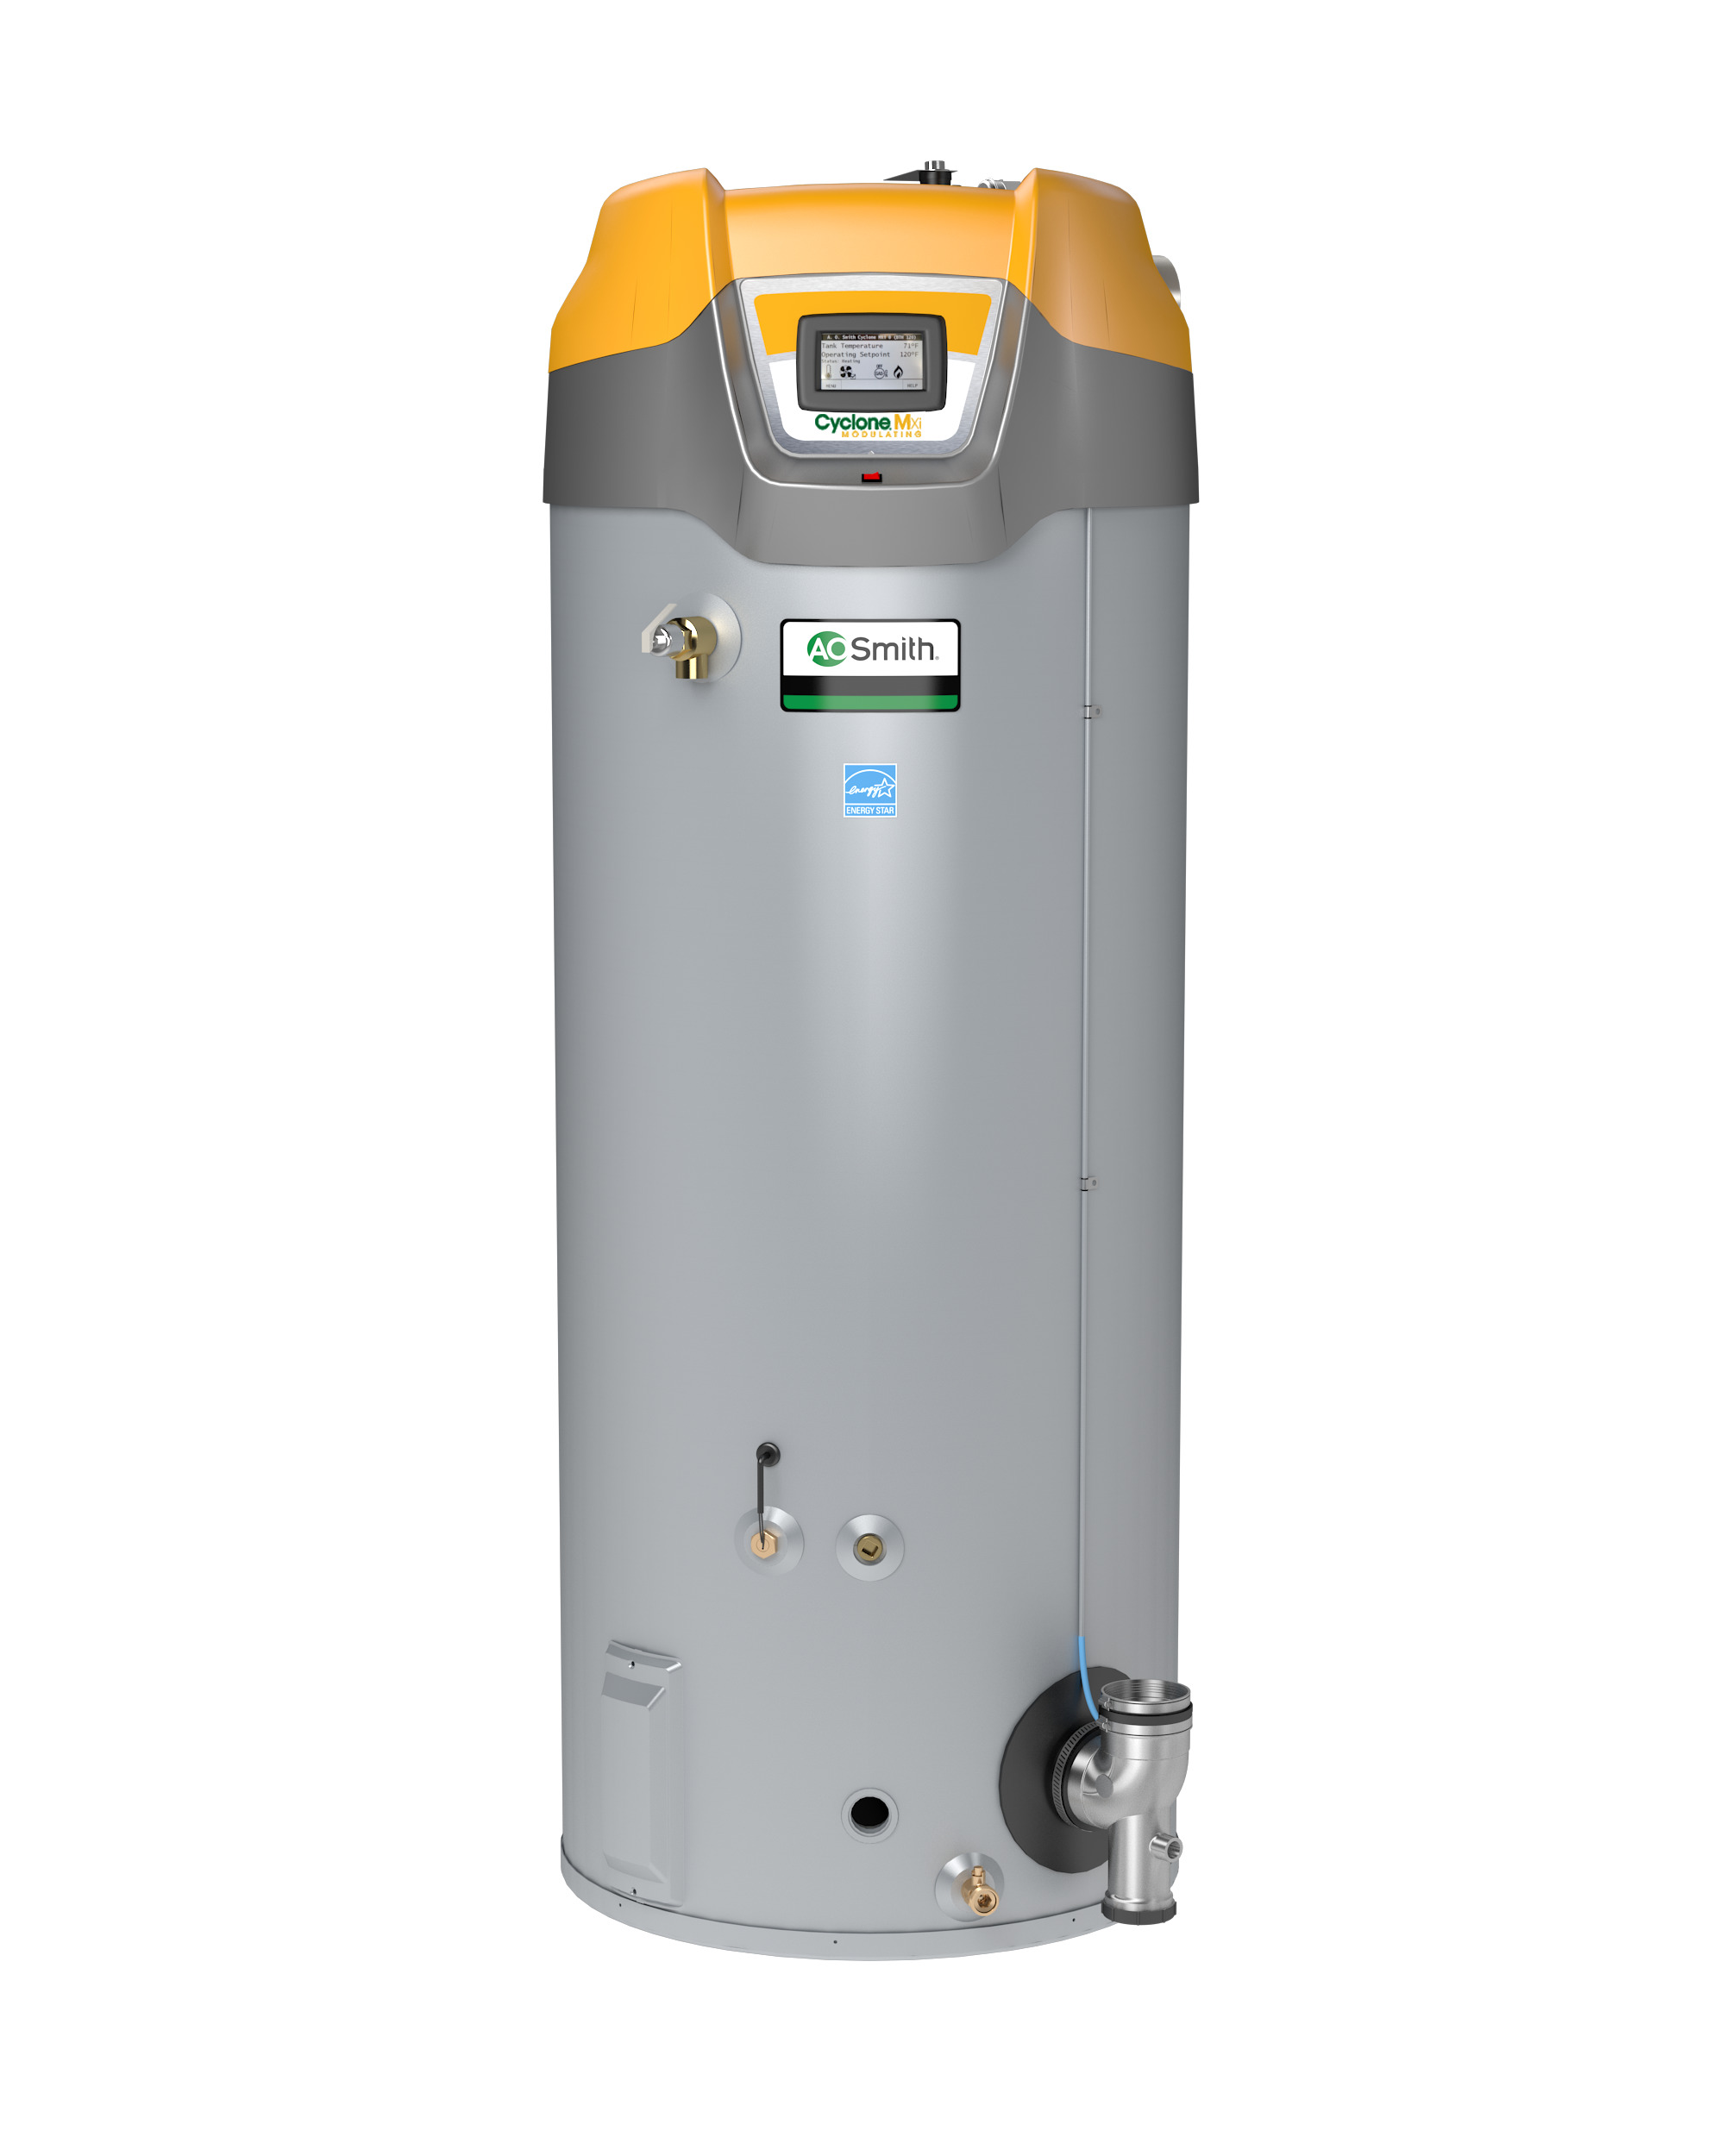 AO SMITH BTH-300A: 119 GALLON, 300,000 BTU, ASME, 4" VENT, UP TO 96% THERMAL EFFICIENCY, NATURAL GAS, CYCLONE Mxi MODULATING COMMERCIAL GAS WATER HEATER